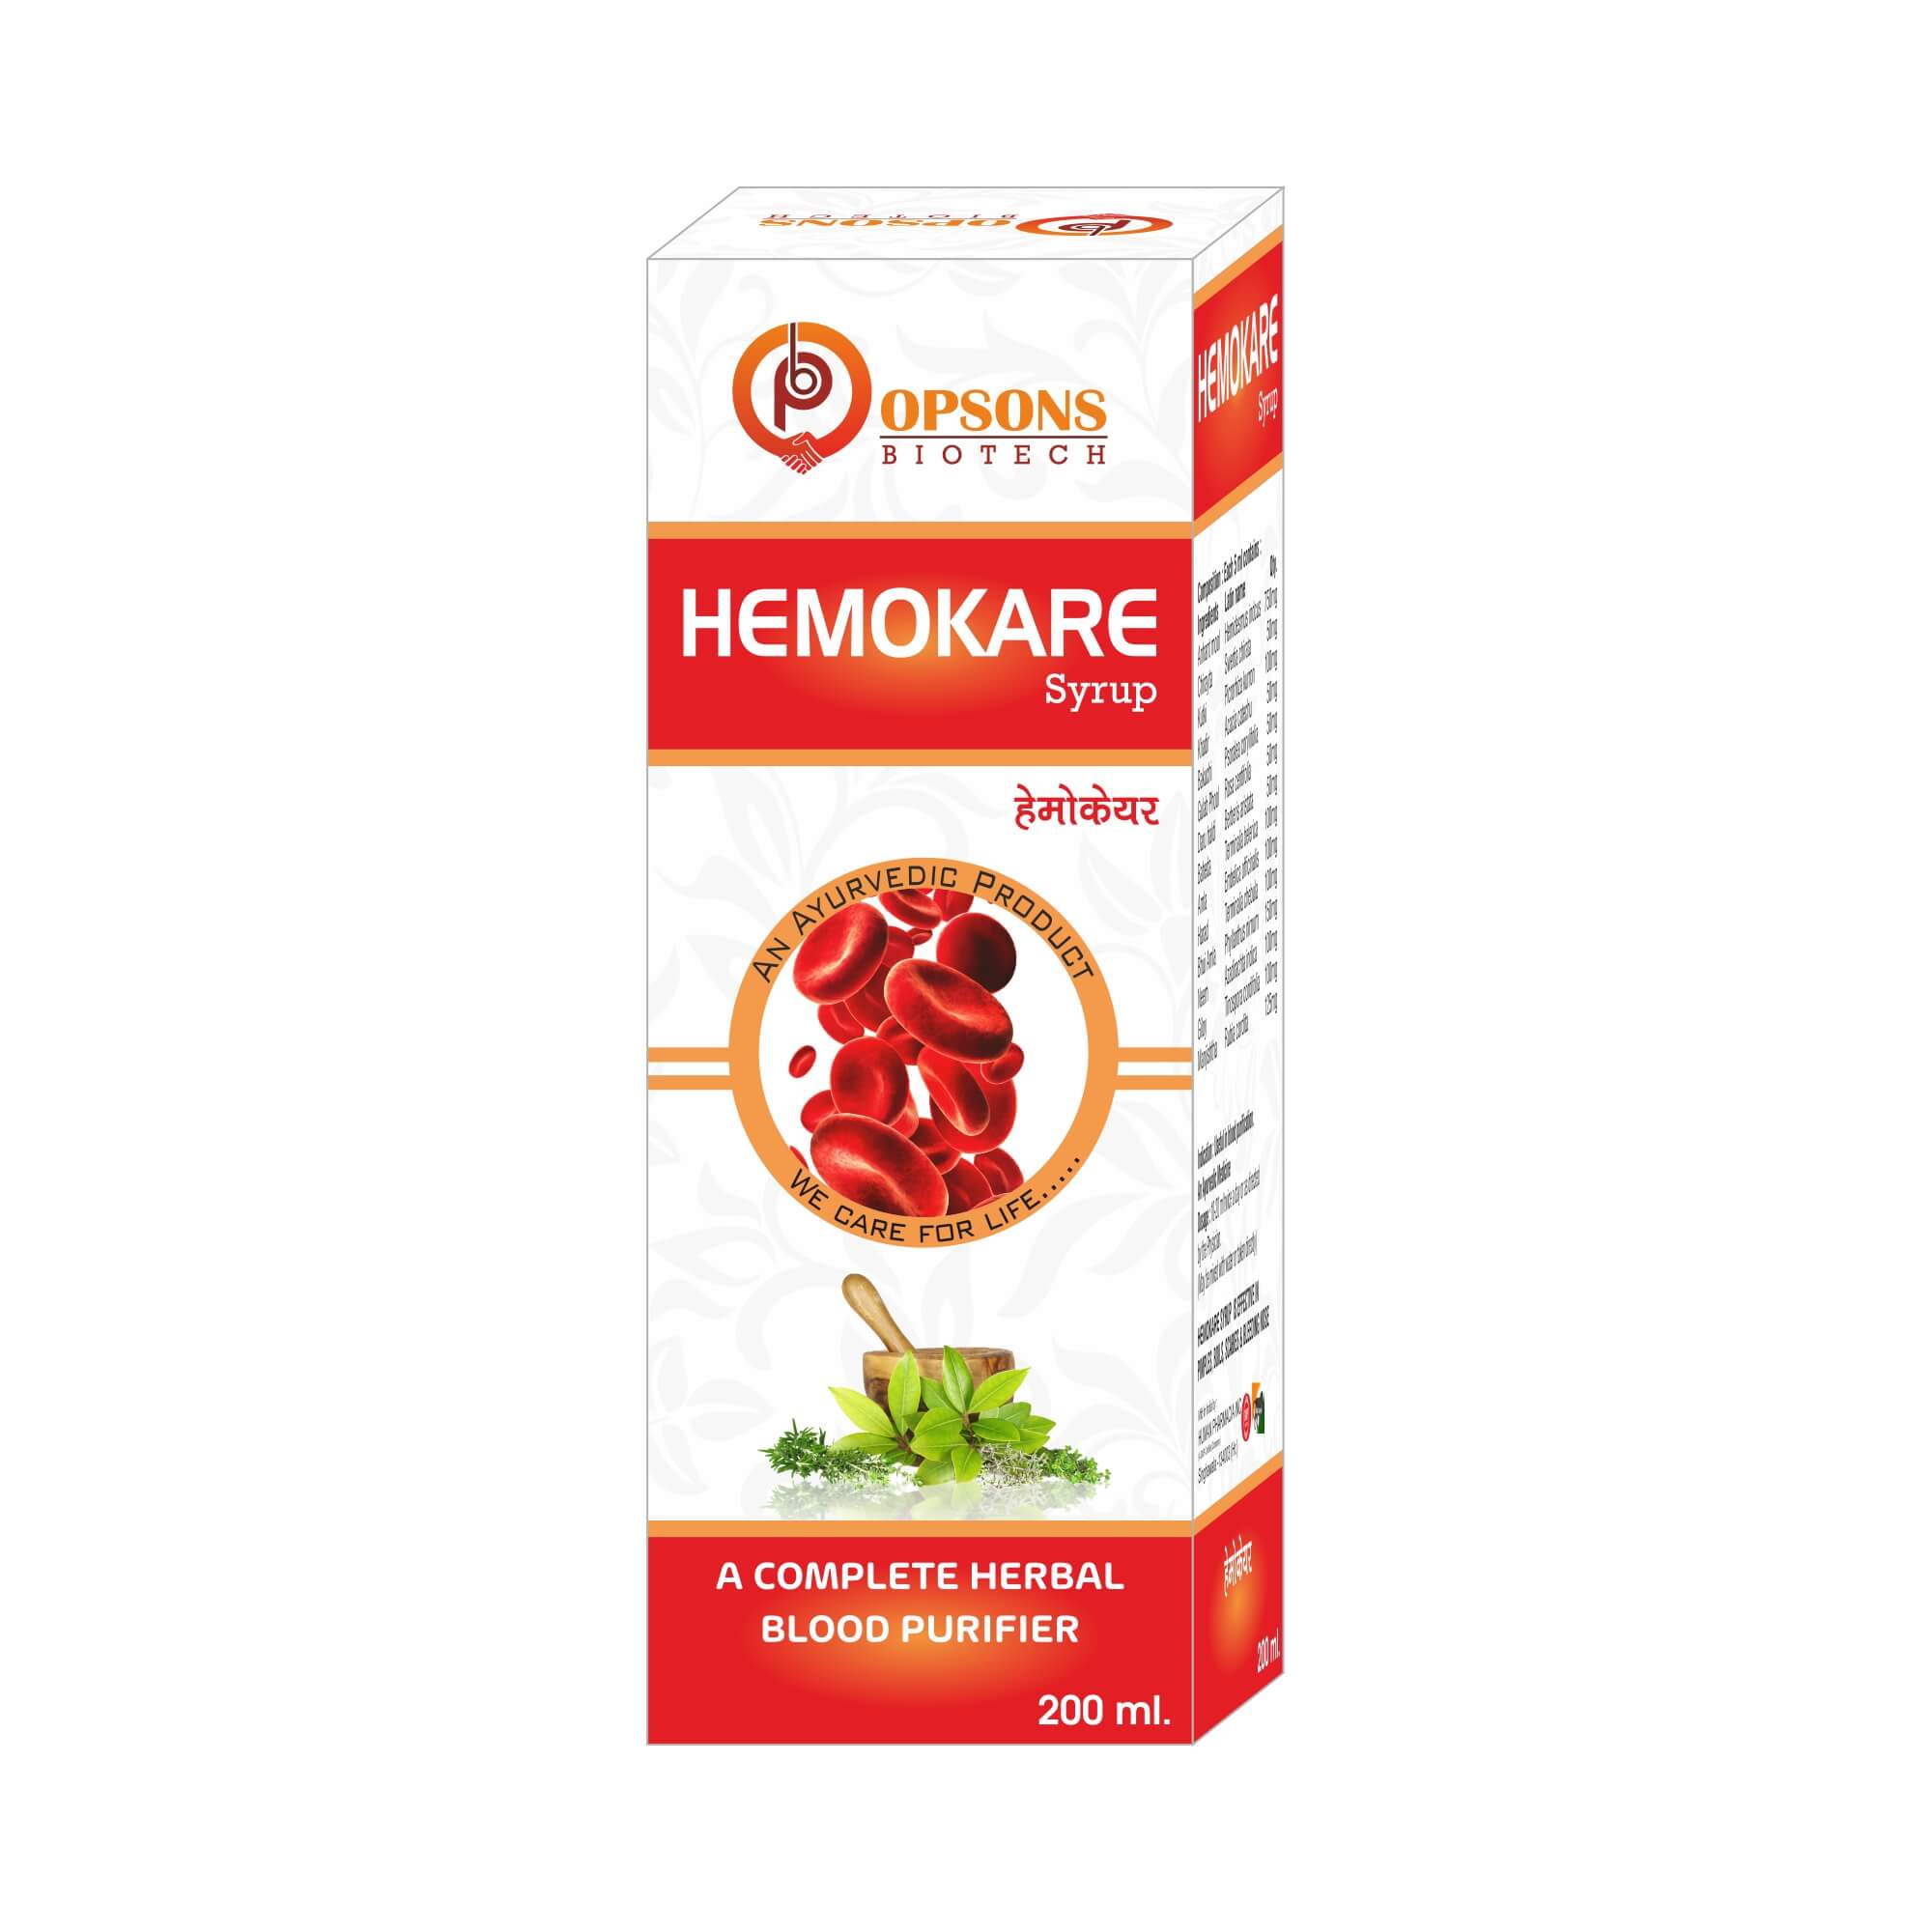 Product Name: Hemokare, Compositions of Hemokare are A Complete Herbal Blood Purifier  - Opsons Biotech